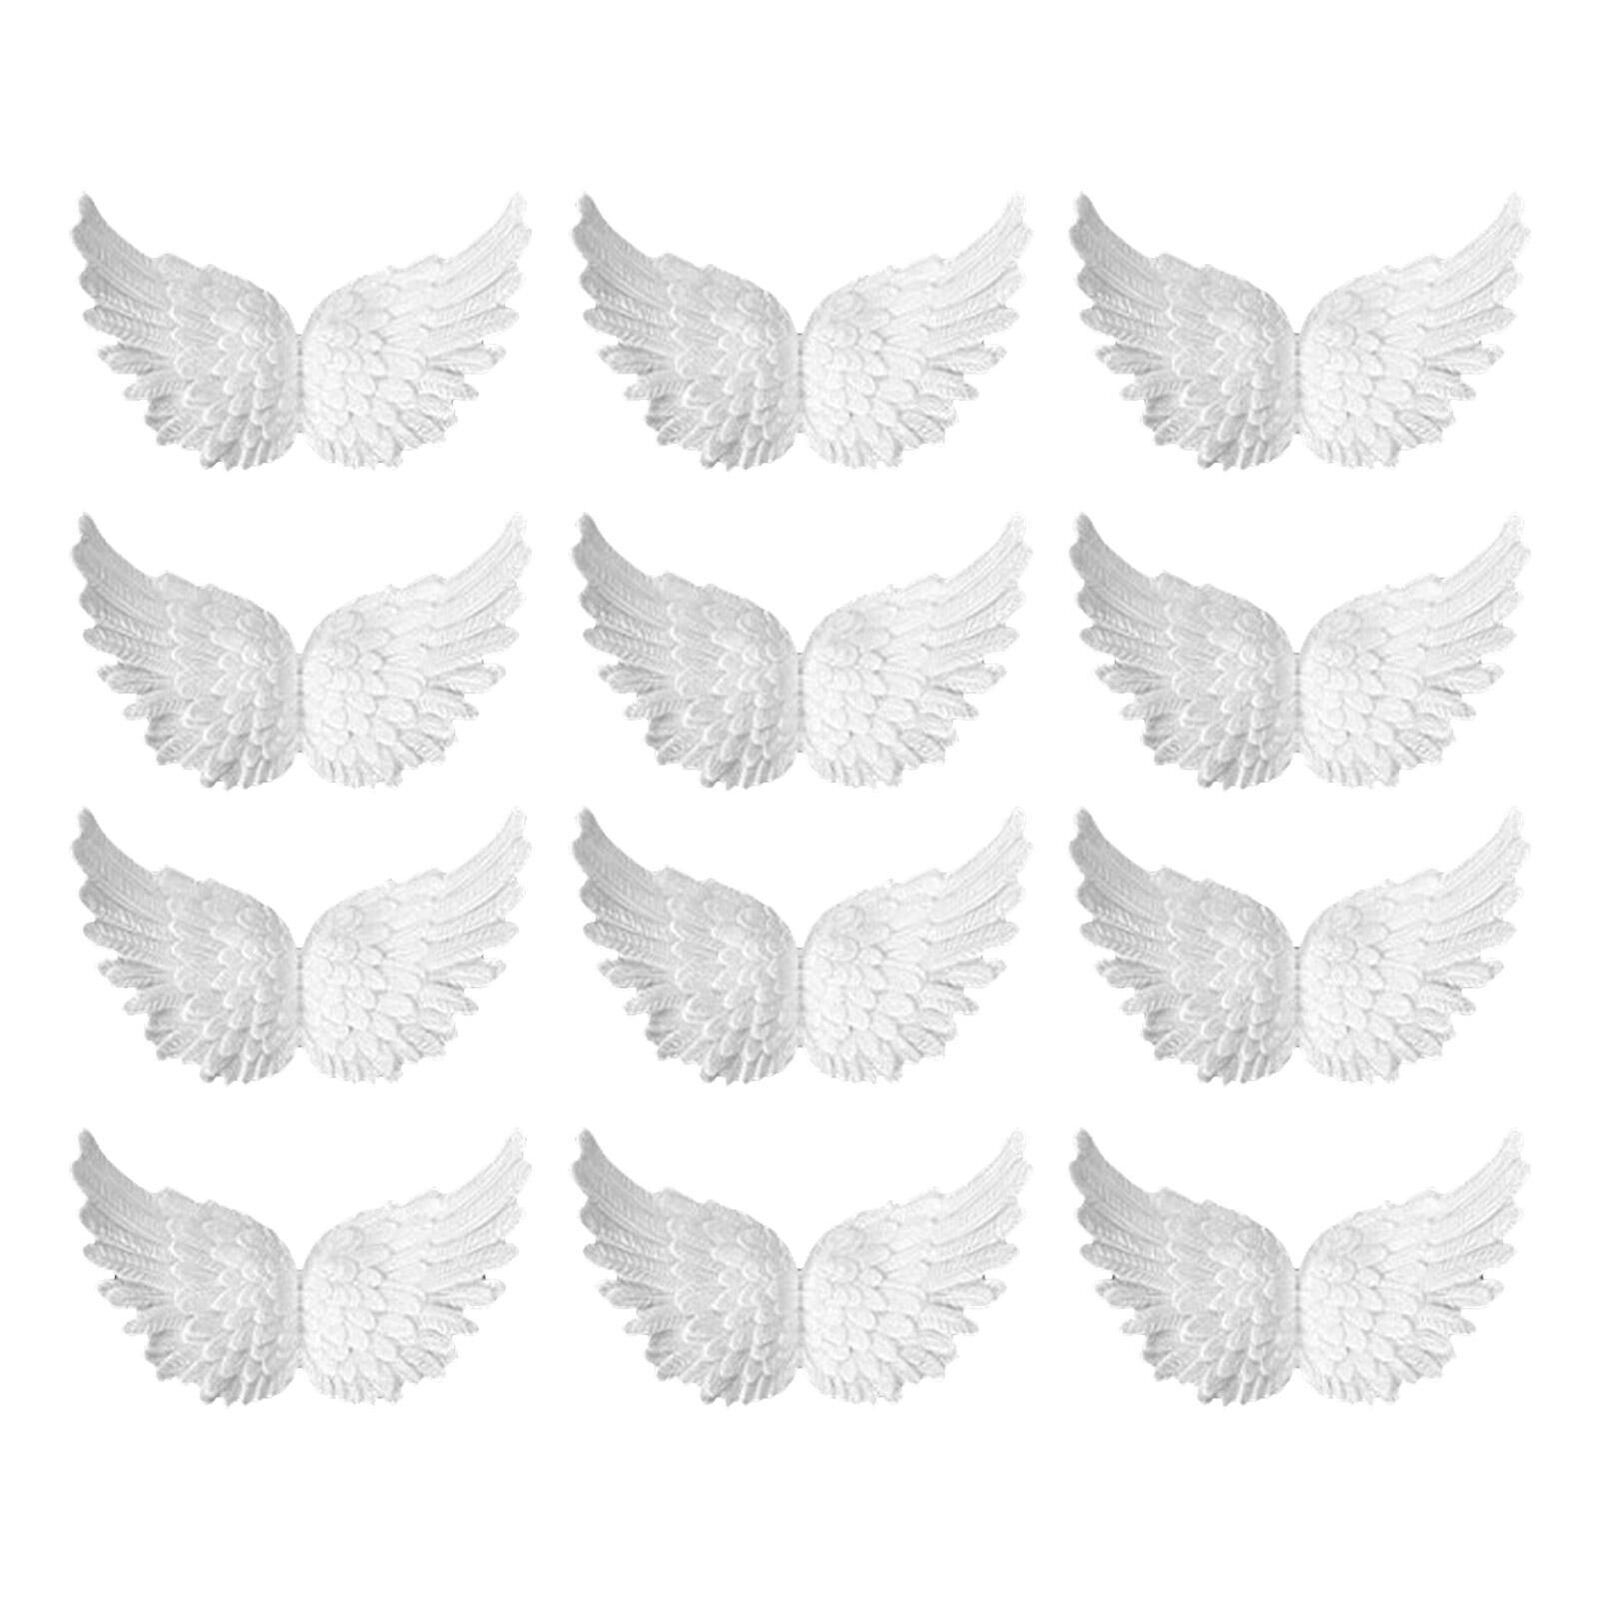 Mini Small Angel Wings for Crafts White Wings Patches Clothes Applique DIY Craft